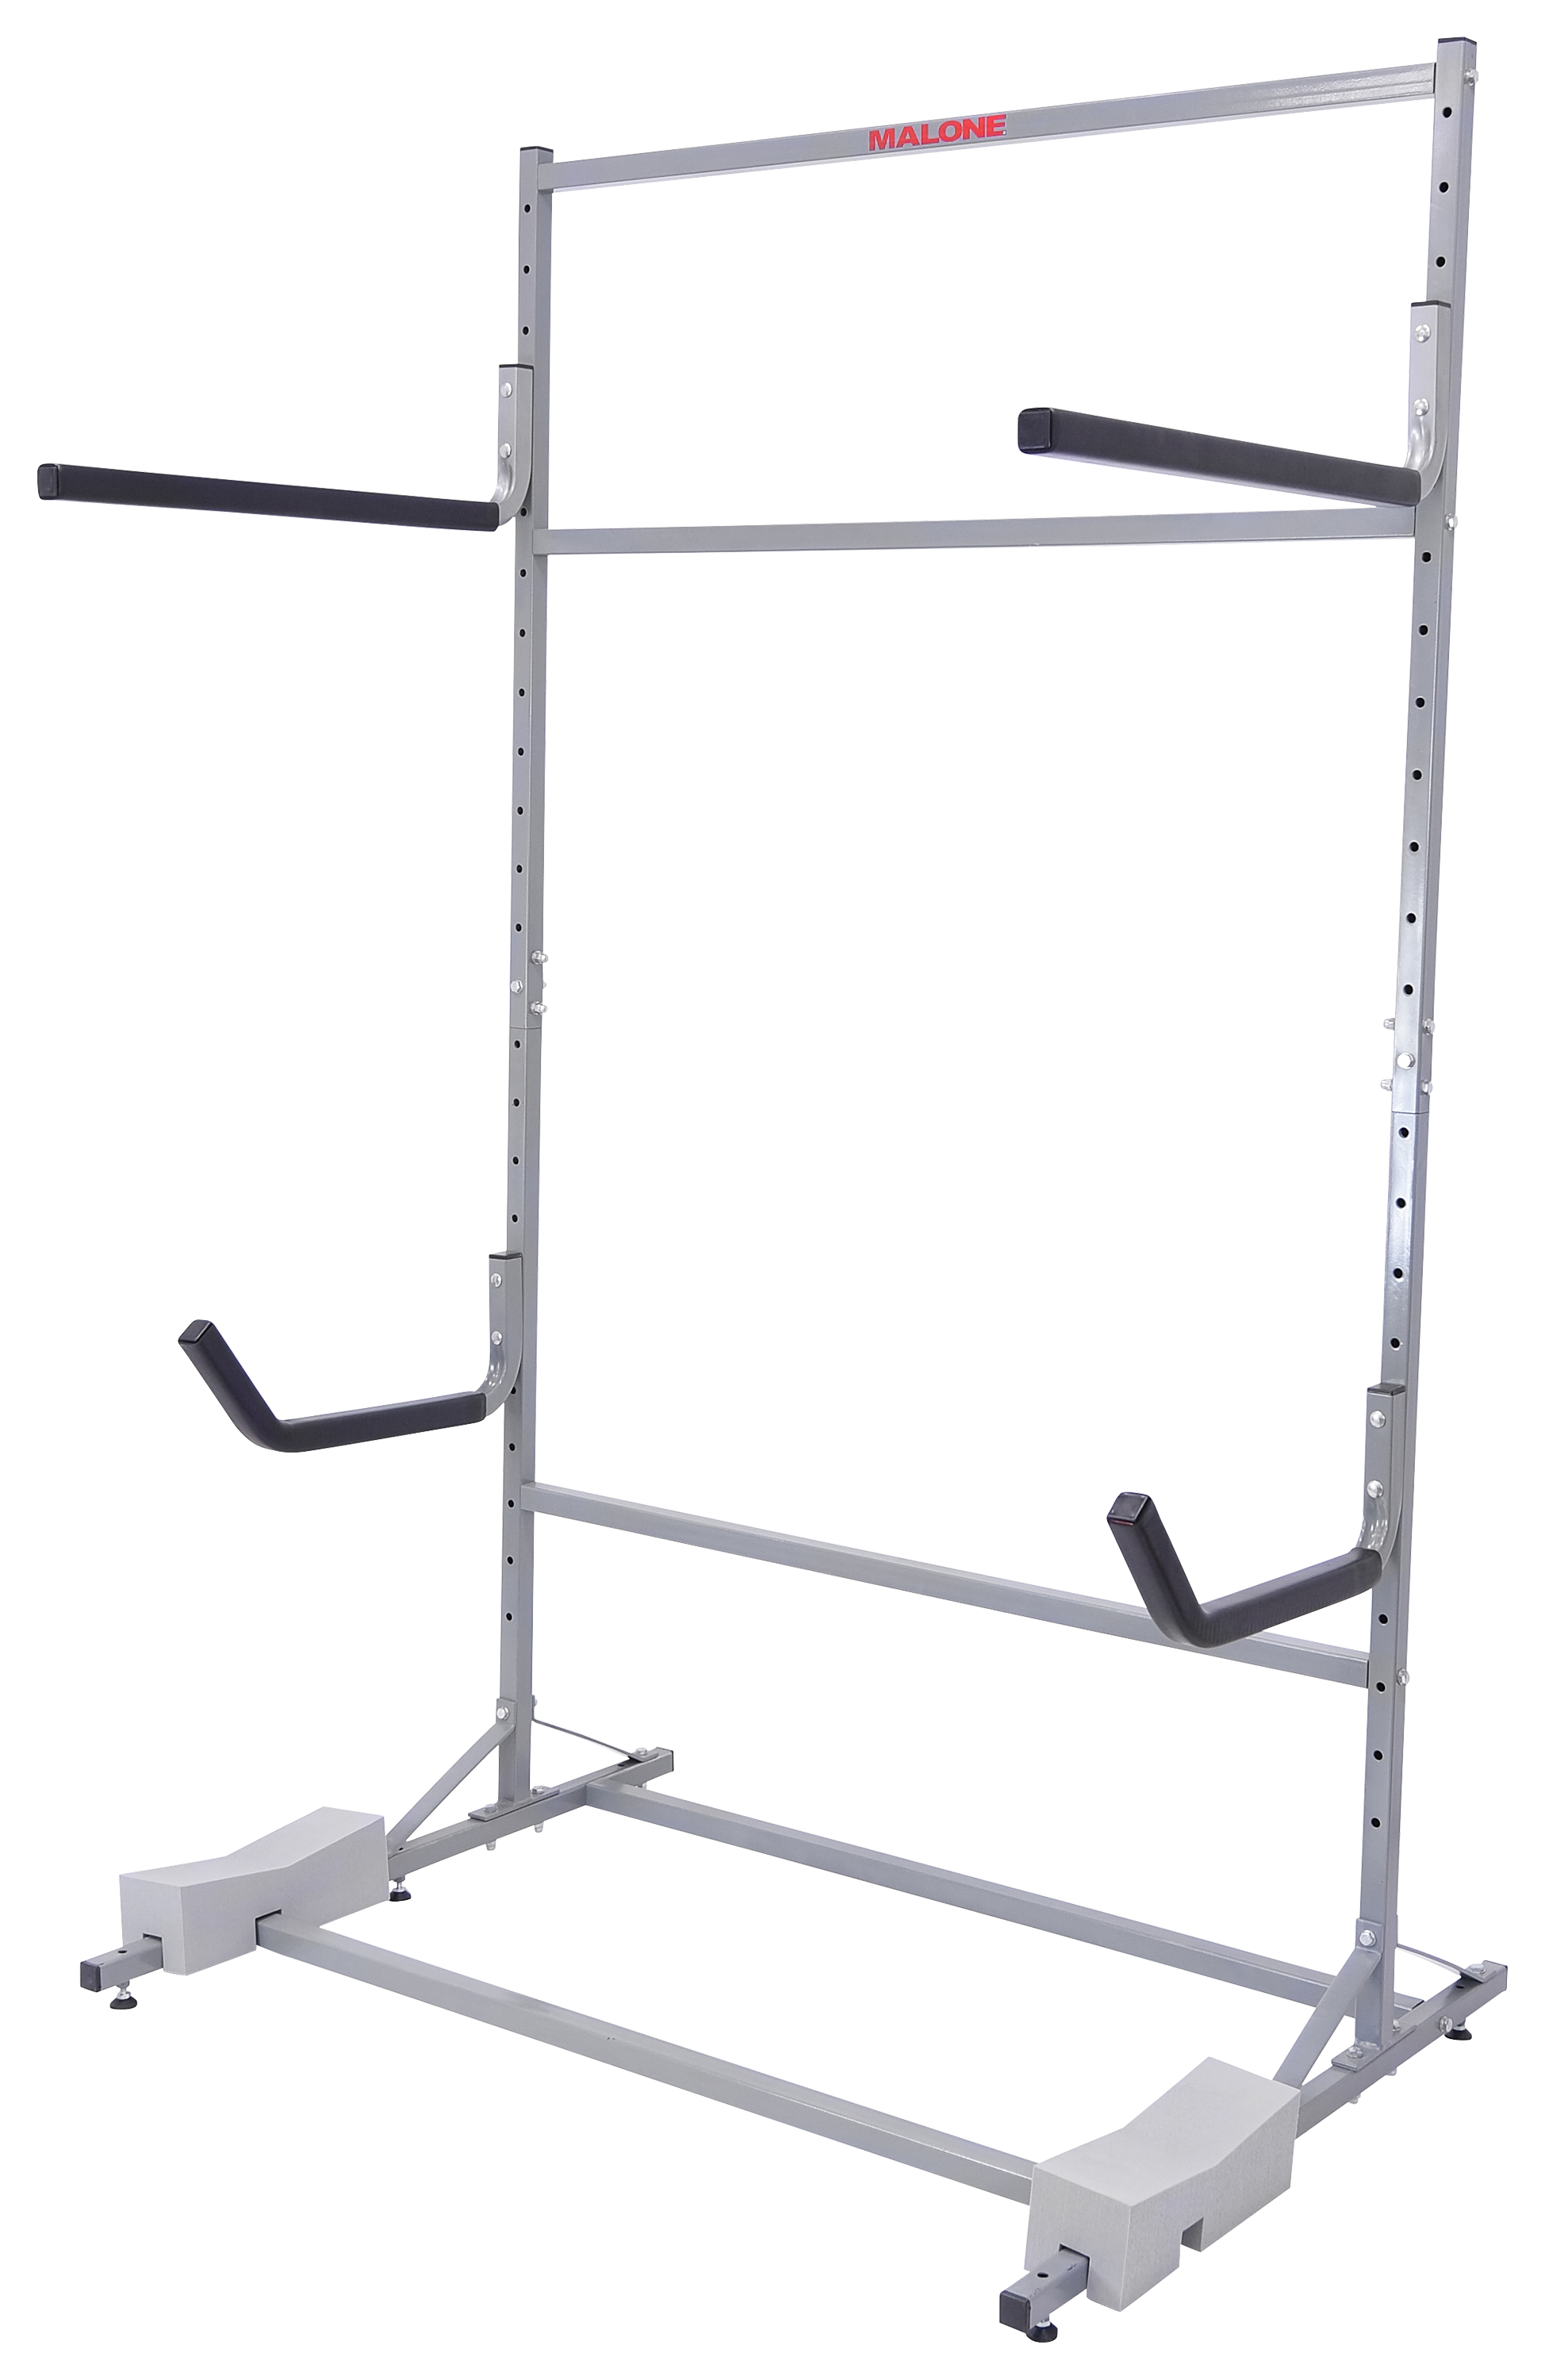 Malone Free Standing Rack System for Kayaks and SUP's